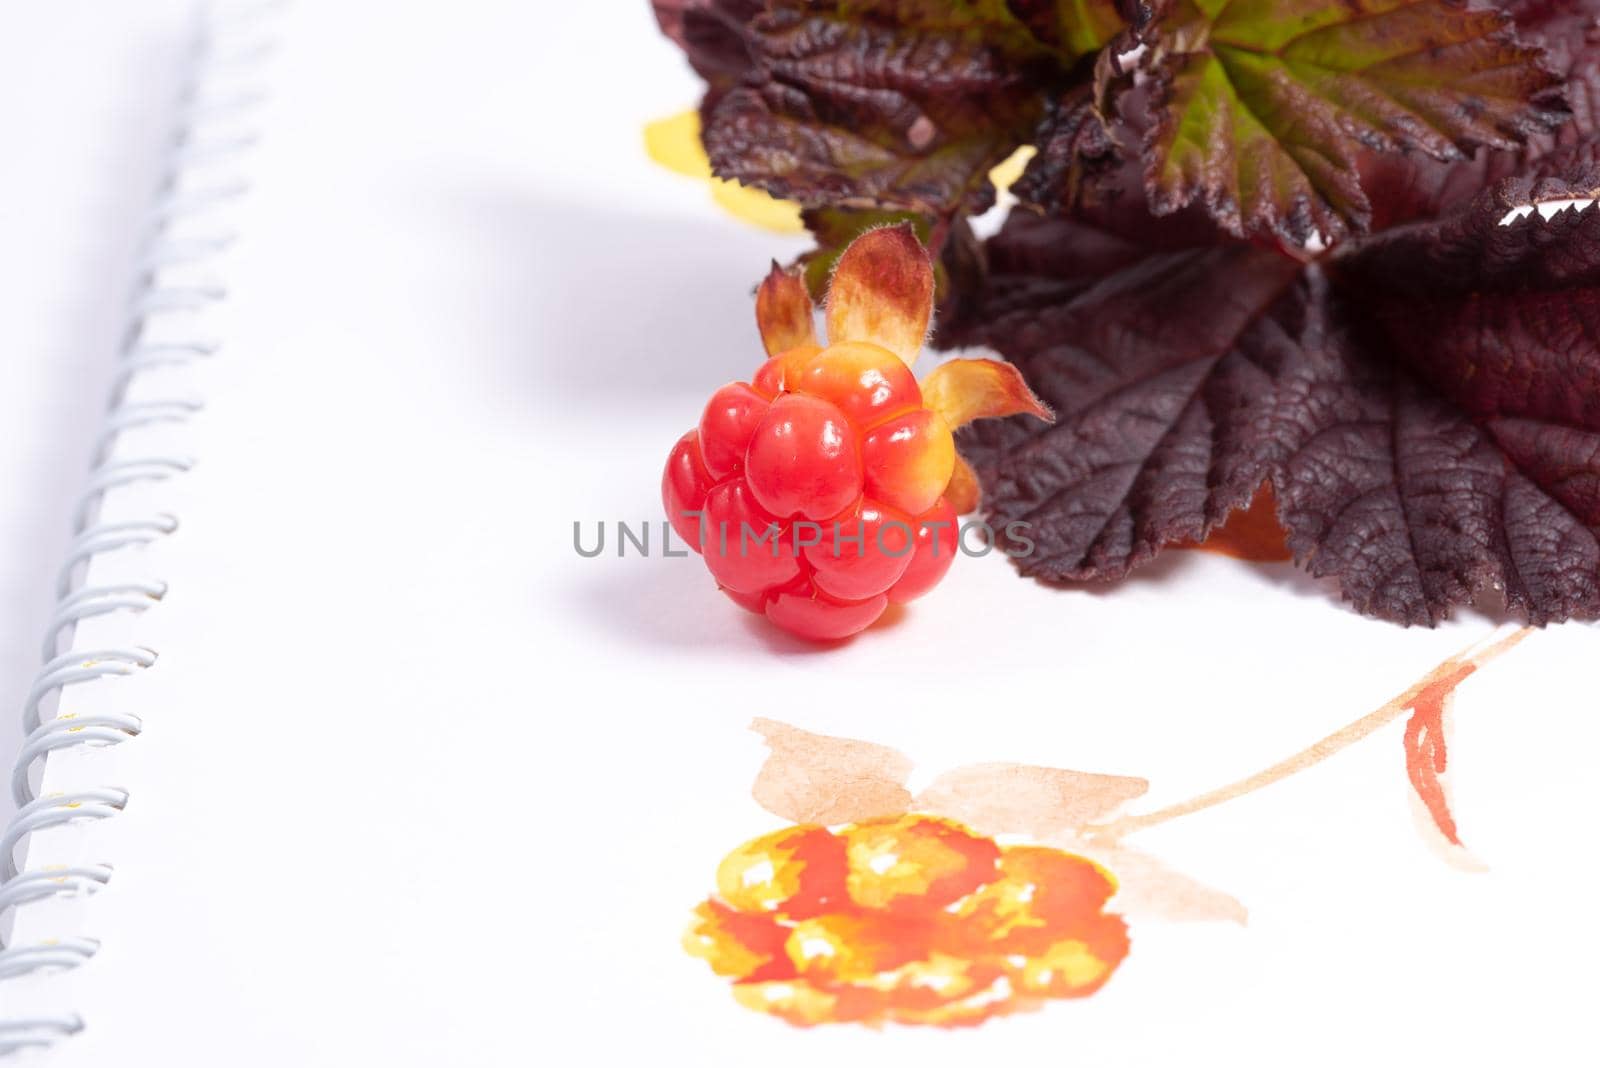 Cloudberry with leaves laying on a white scetchbook background with painted berry by Estival